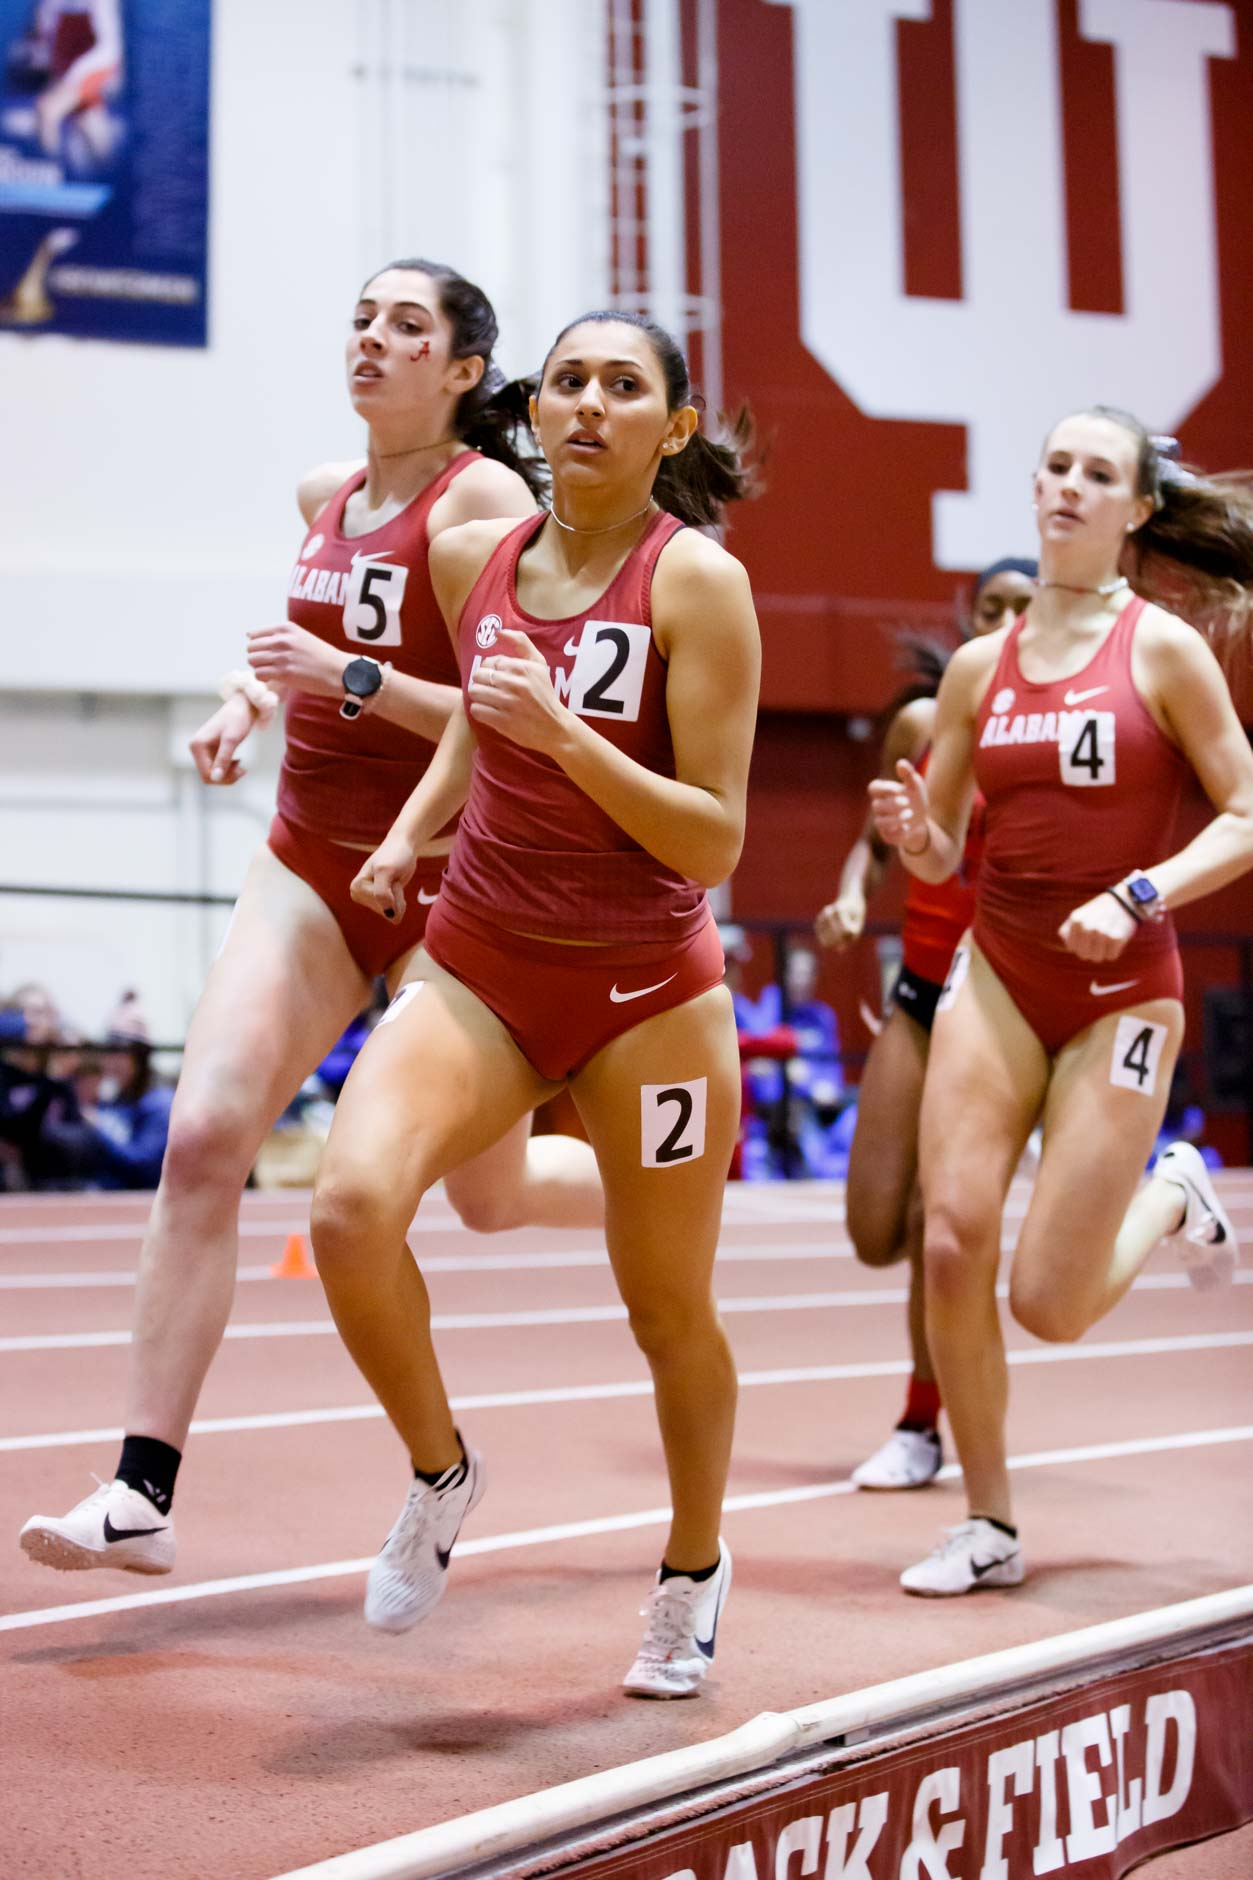 Alabama’s Alex Wilkins, Savannah Noethlich (2) and Jami Reed (4) compete in the 800 meter run during the Indiana University Relays in Bloomington, Indiana on Saturday, Feb. 1, 2020. (Photo by James Brosher)